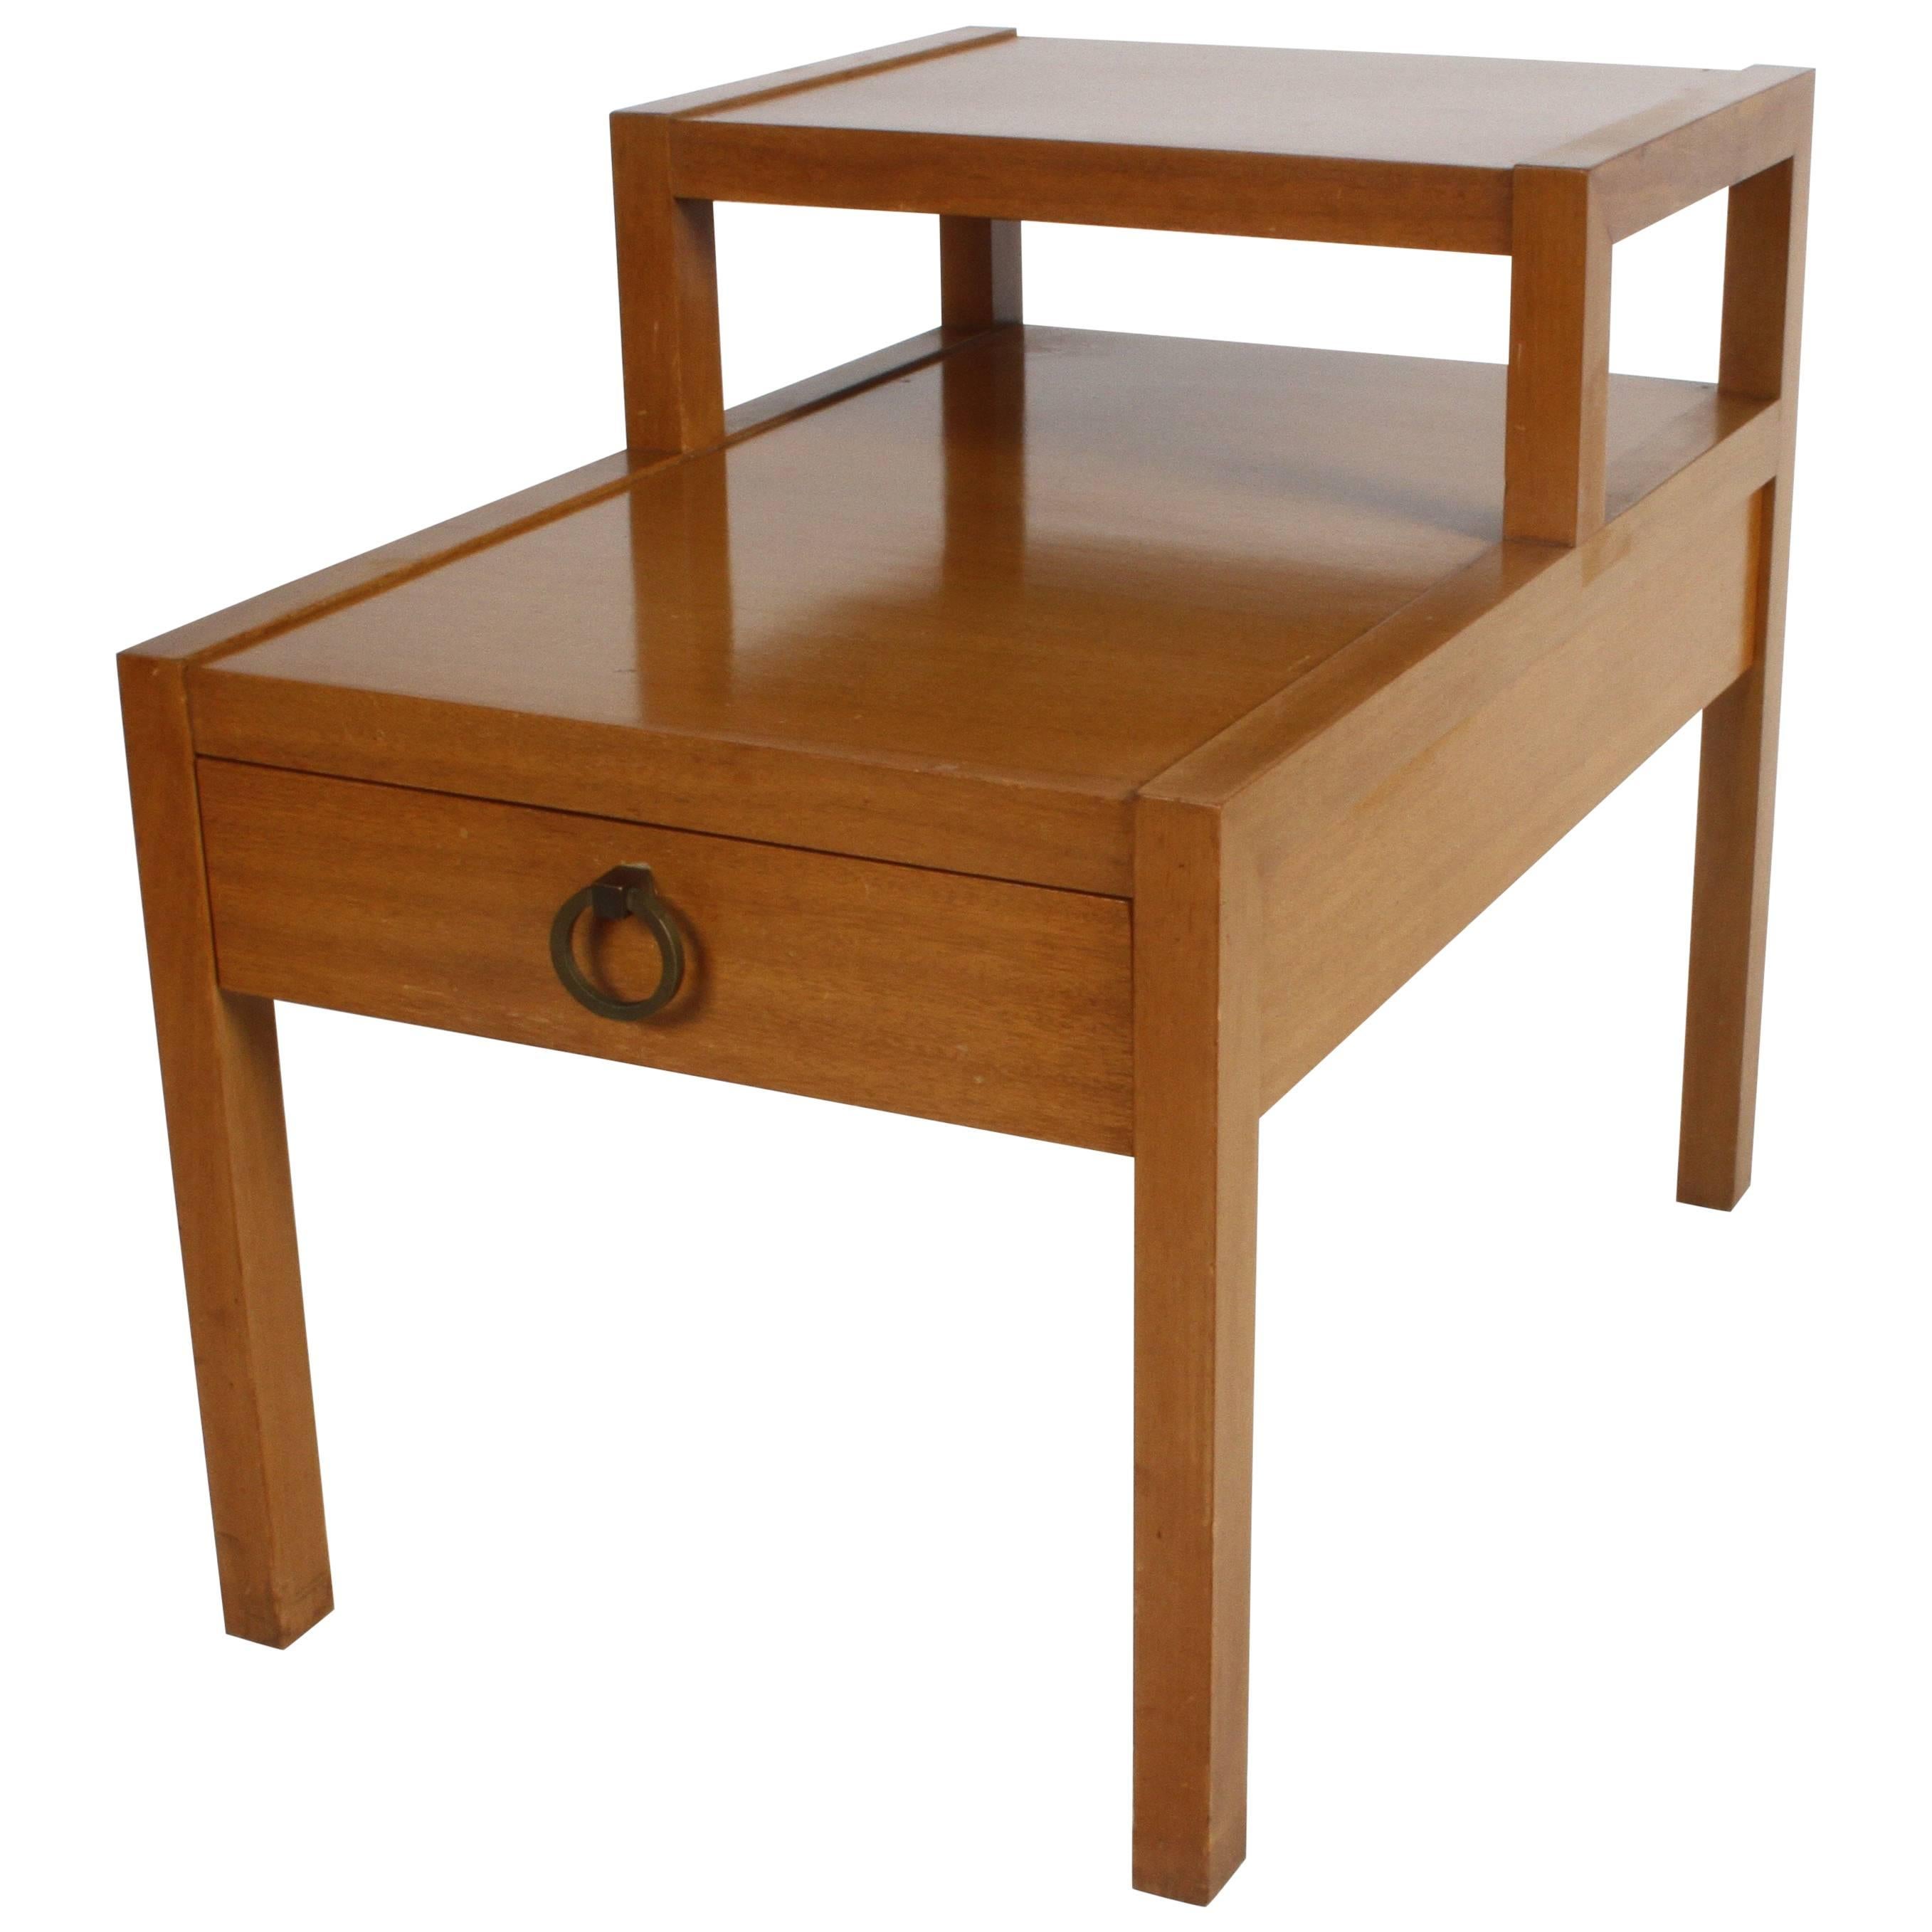 Mid-Century Modern stepped or tiered end table with drawer and brass Asian style ring pull. Original finish, shows wear. Can be refinished for additional cost. T.H. Robsjohn-Gibbings did a similar design for Widdicomb. Lower shelf is 17.25